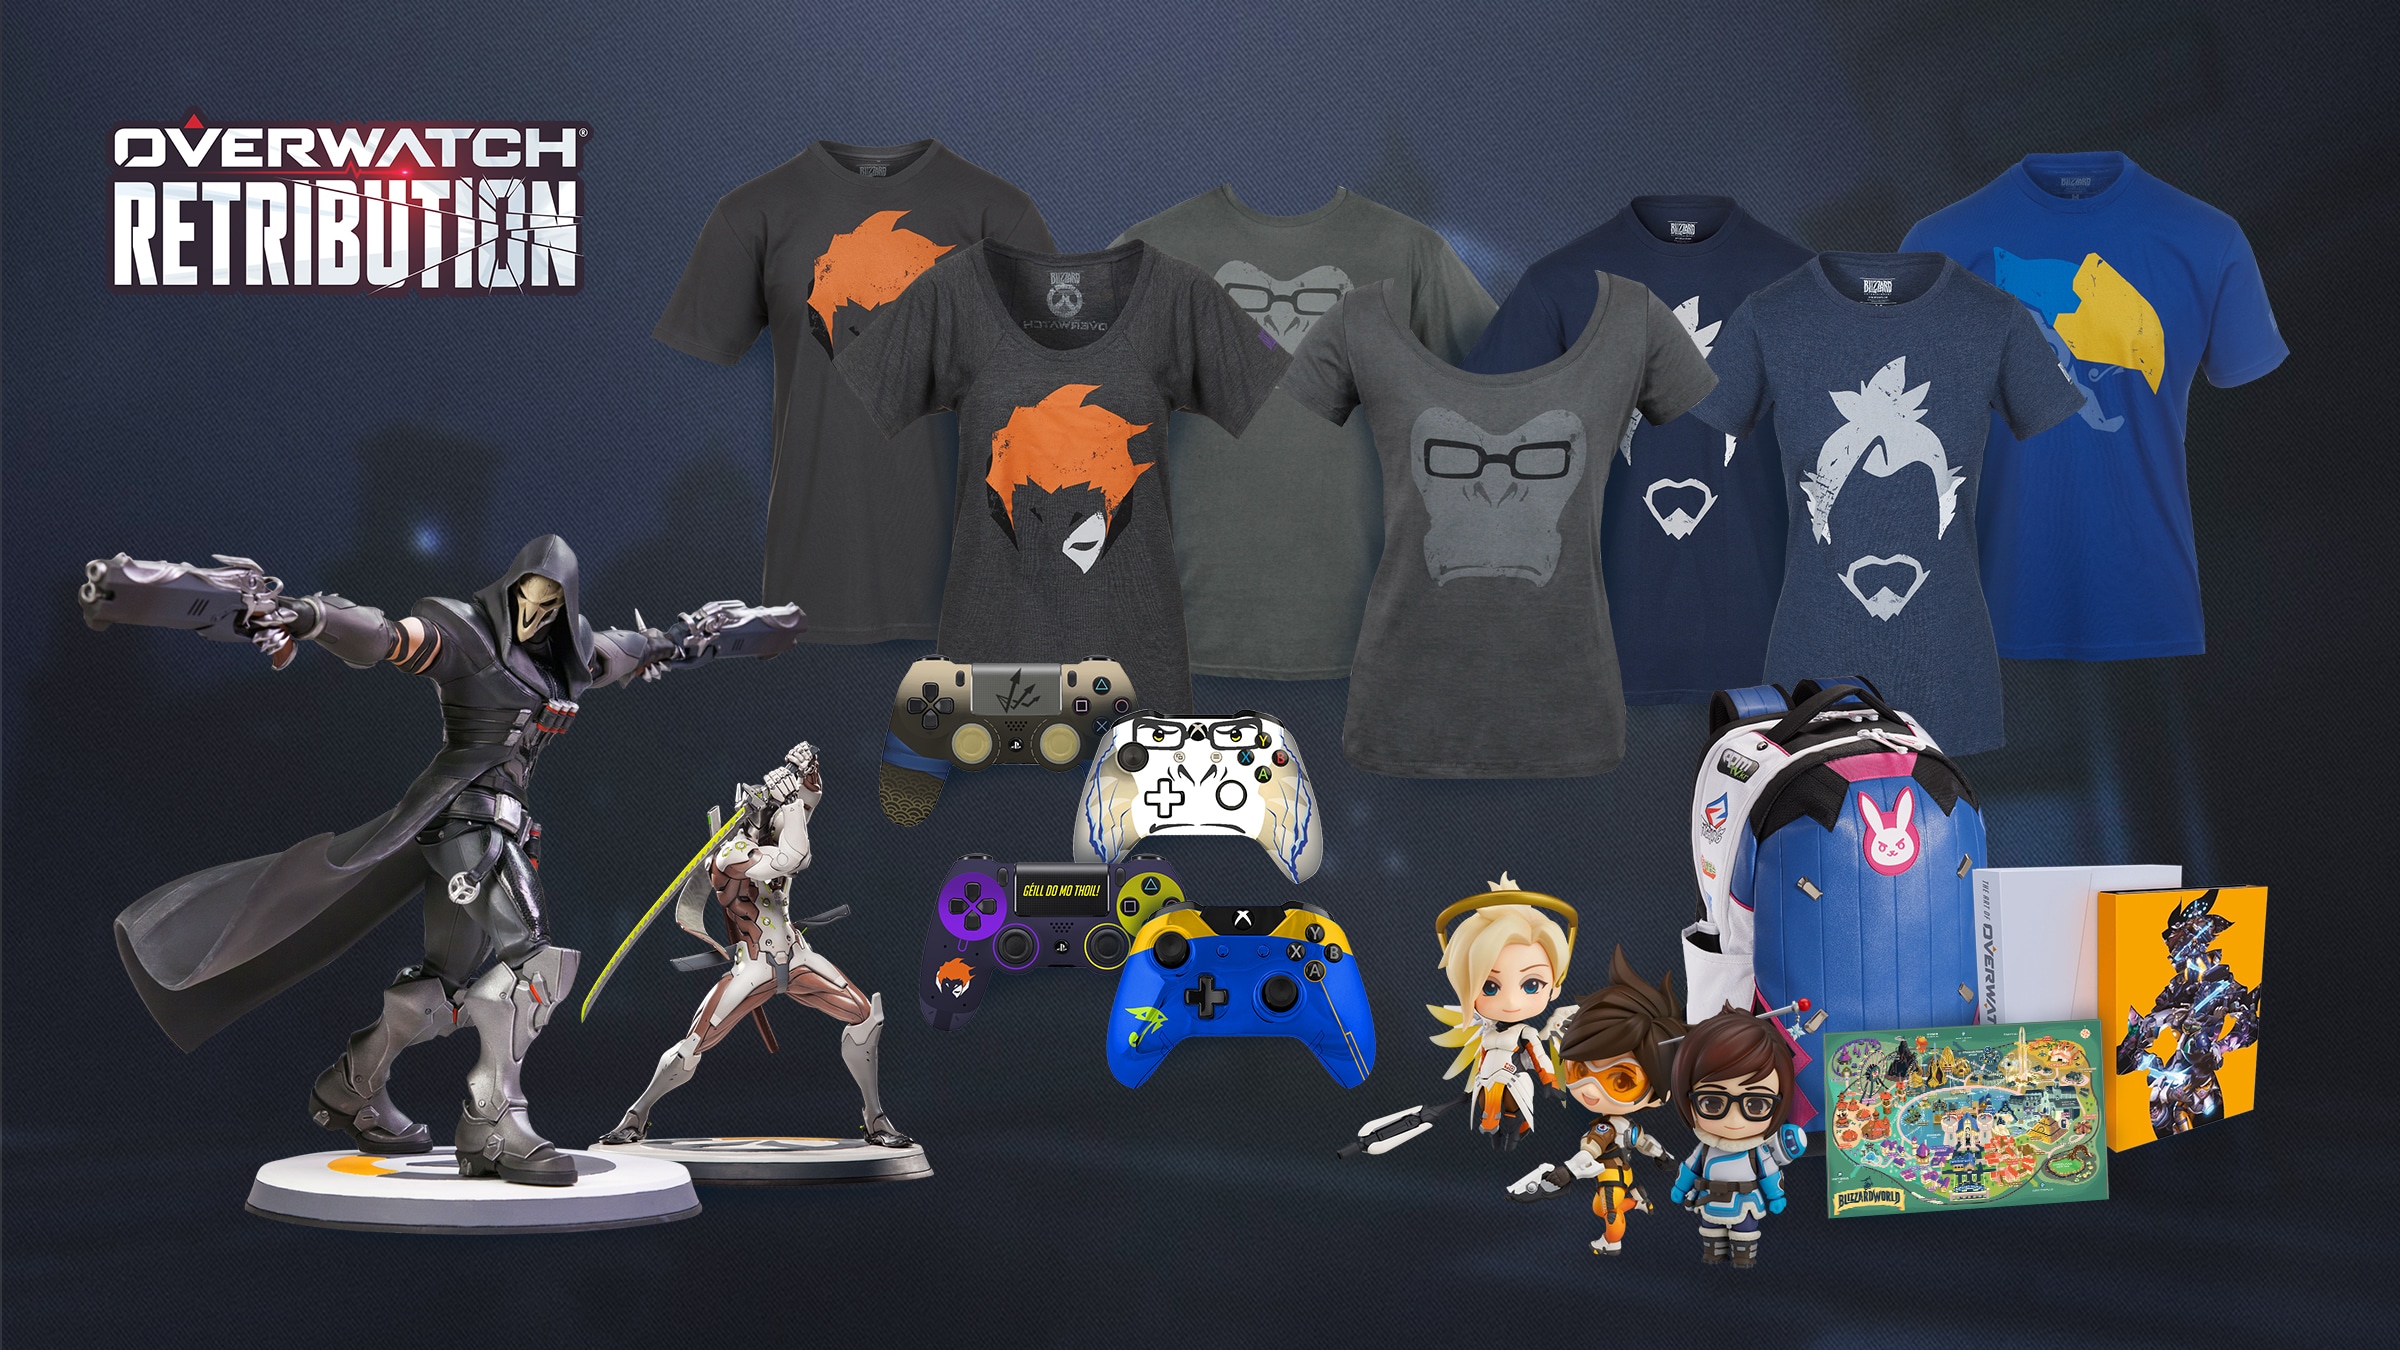 Enter the Overwatch Retribution Sweepstakes